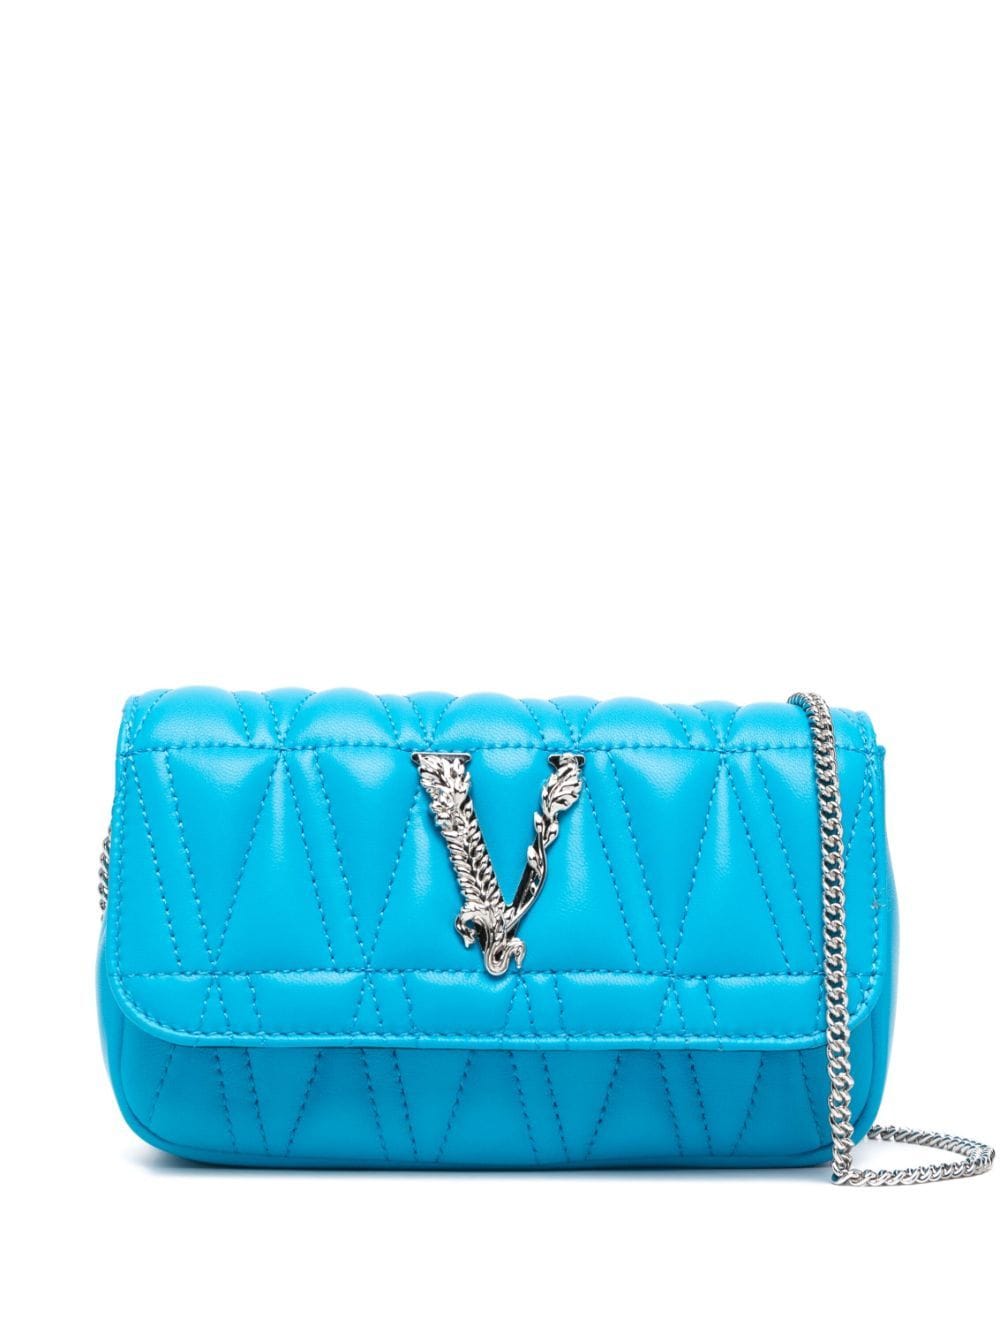 VERSACE VIRTUS QUILTED LEATHER MINI BAG